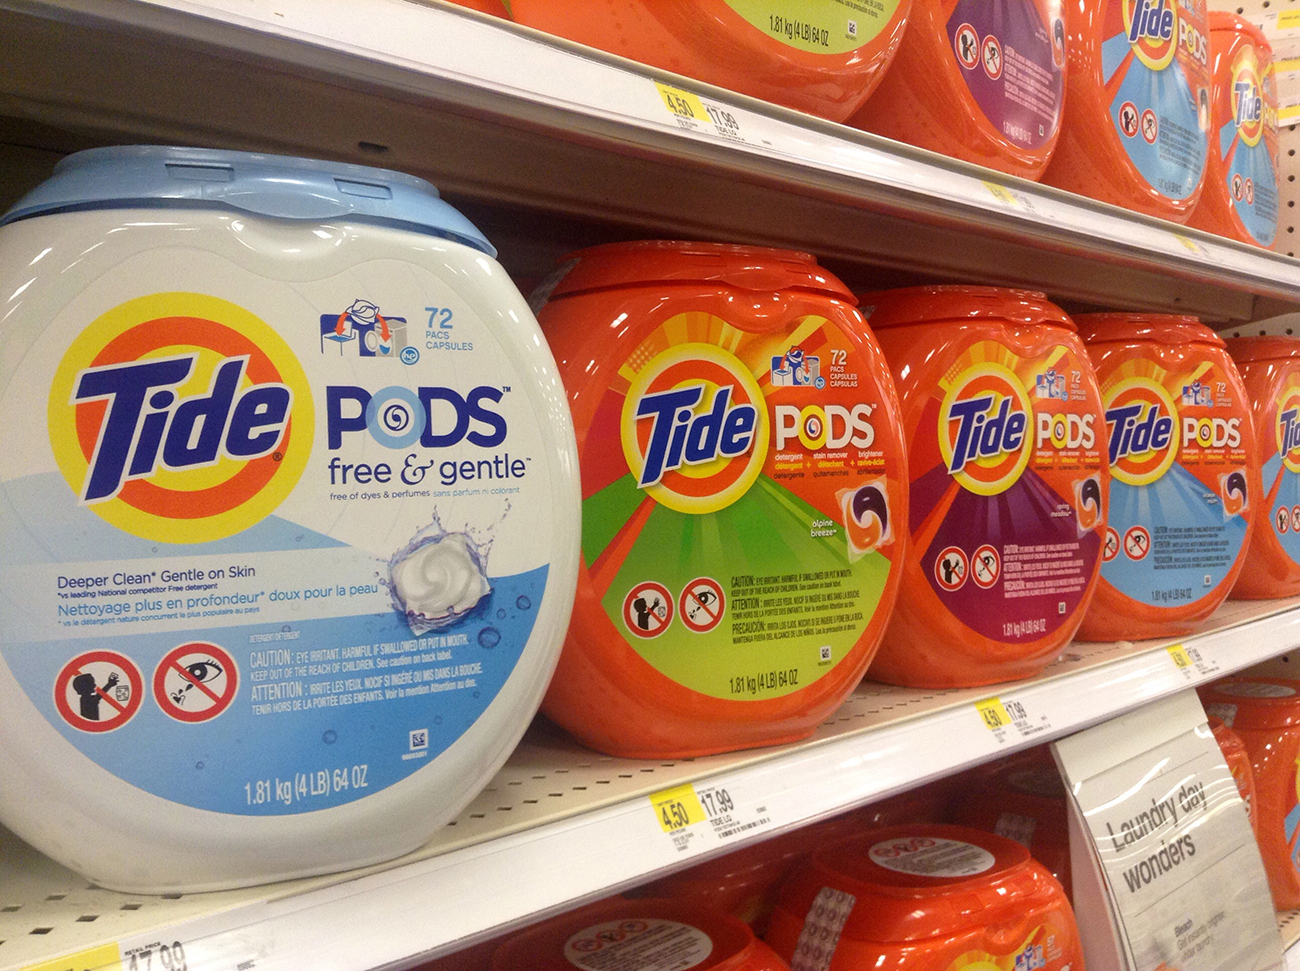 A photo shows a close-up of Tide Pods displayed on the shelves of a supermarket.